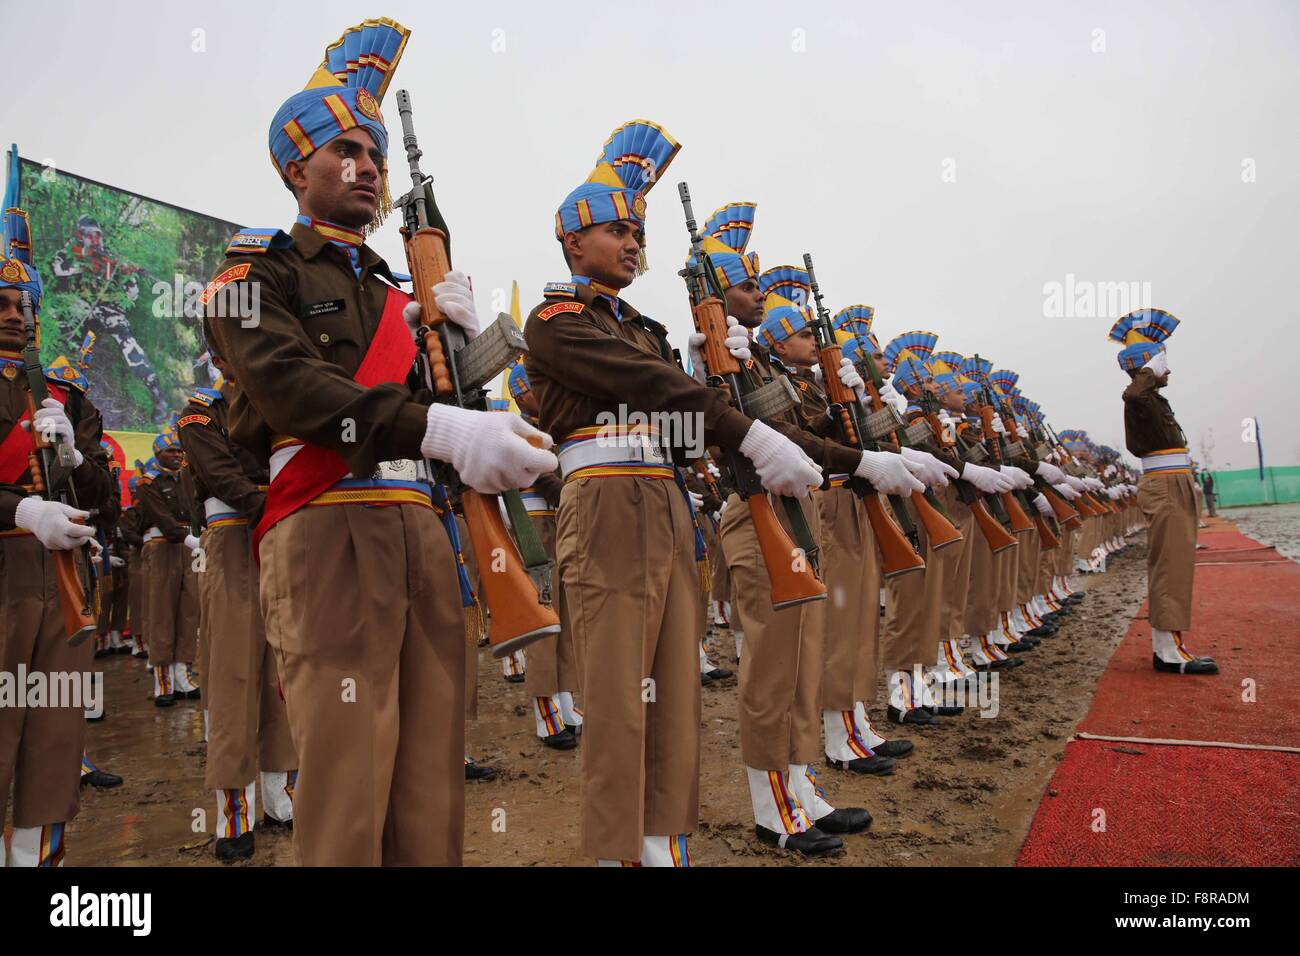 Srinagar, Kashmir. 11th Dec, 2015. Recruits of India's Central Reserve Police Force (CRPF) take part in a parade at a training center in Humhama on the outskirts of Srinagar, Indian-controlled Kashmir, Dec. 11, 2015. A total of 648 recruits were formally inducted into the India's CRPF after completing nine months of training in physical fitness, weapon handling, commando operations and counter insurgency, a CRPF spokesman said. Credit:  Xinhua/Alamy Live News Stock Photo